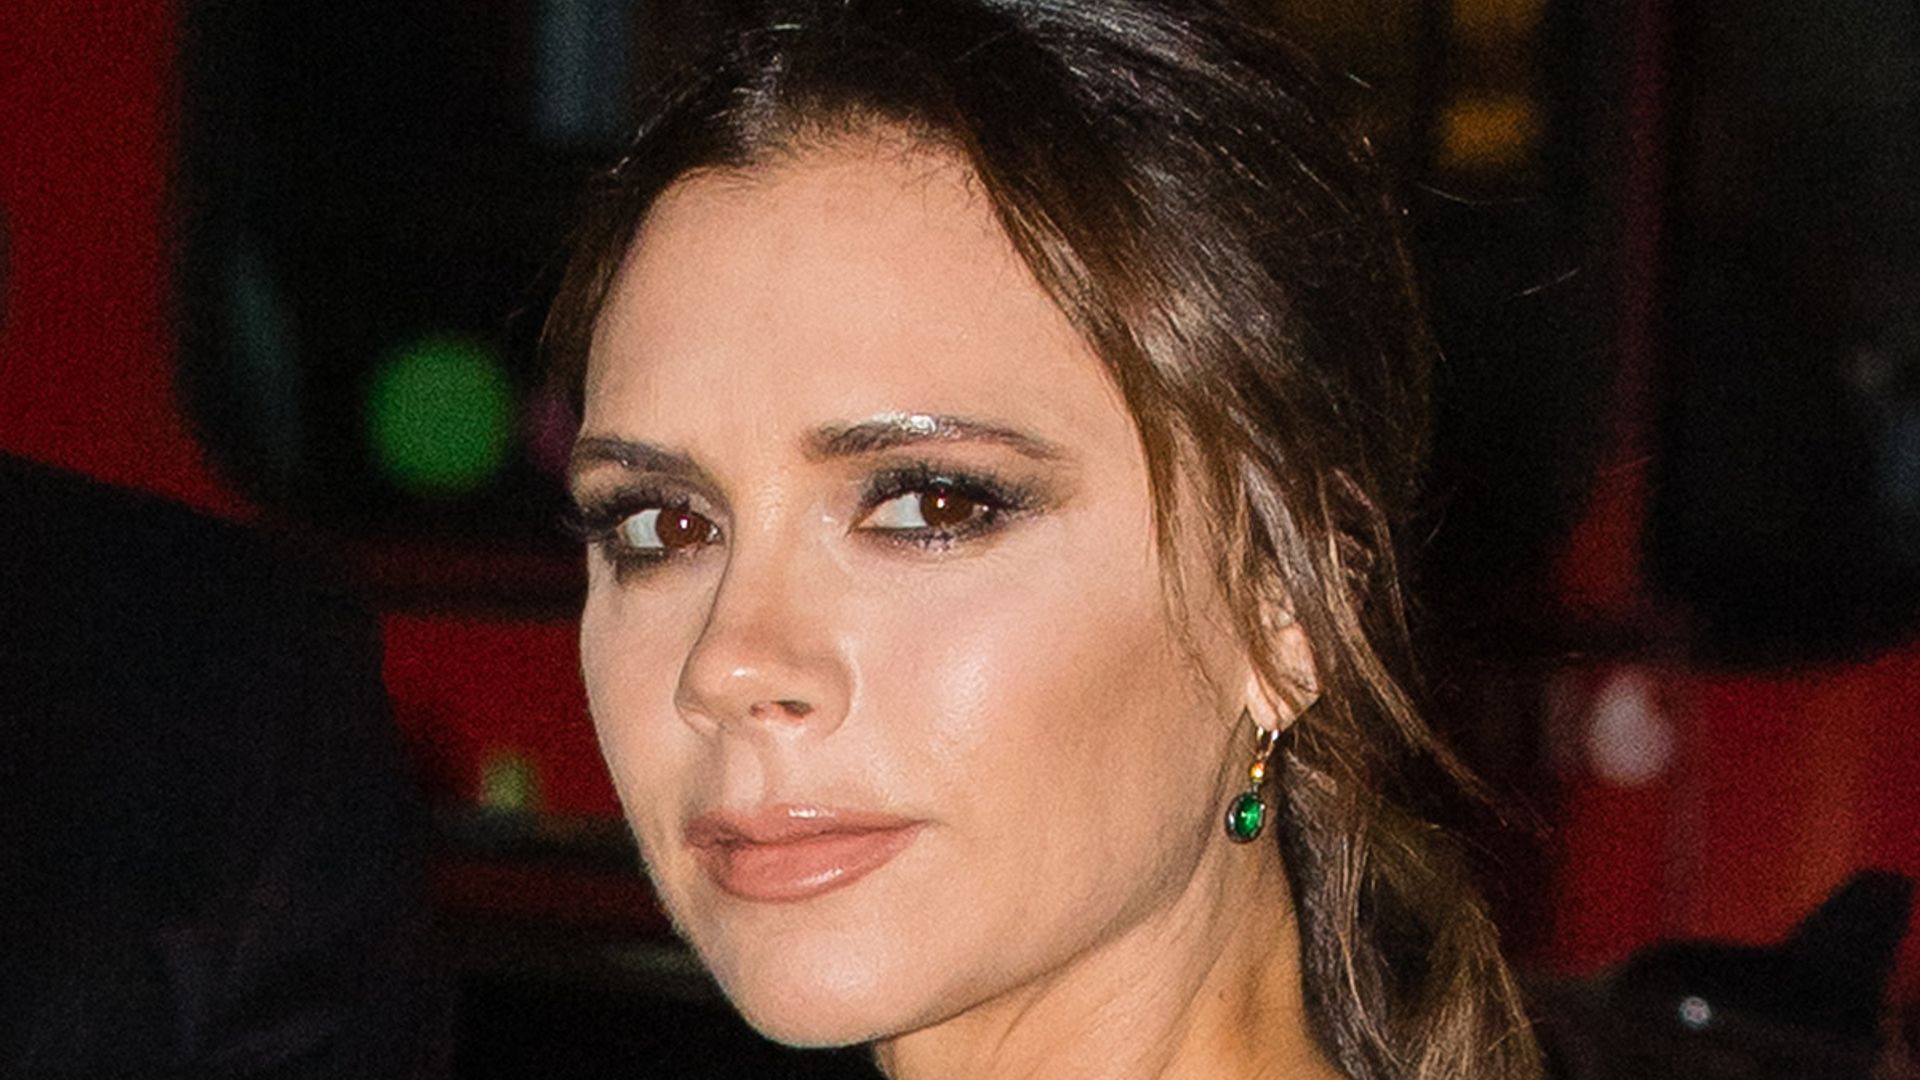 Victoria Beckham shocks with a pair of shoes you just wouldn't expect ...